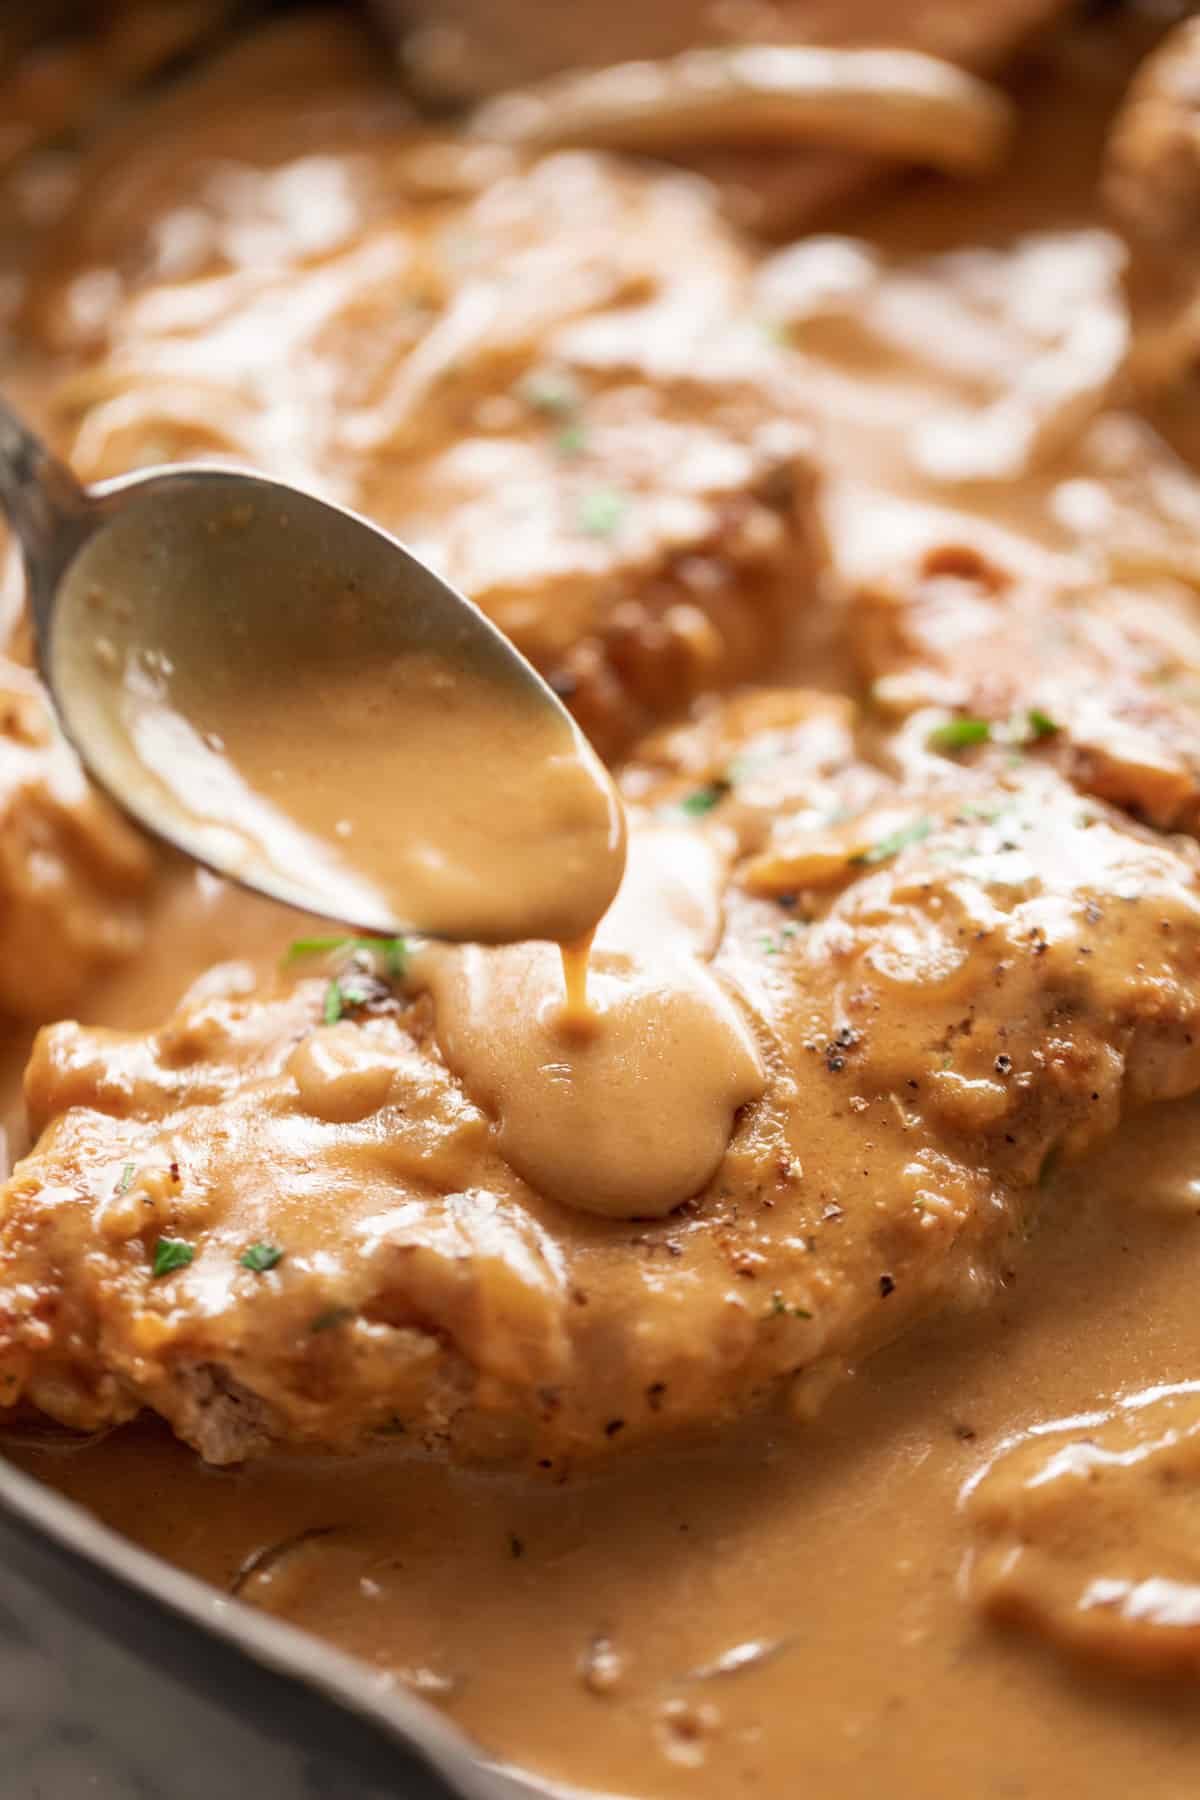 Smothered Pork Chops cooked in a rich onion gravy. Pouring gravy over one pork chop before serving